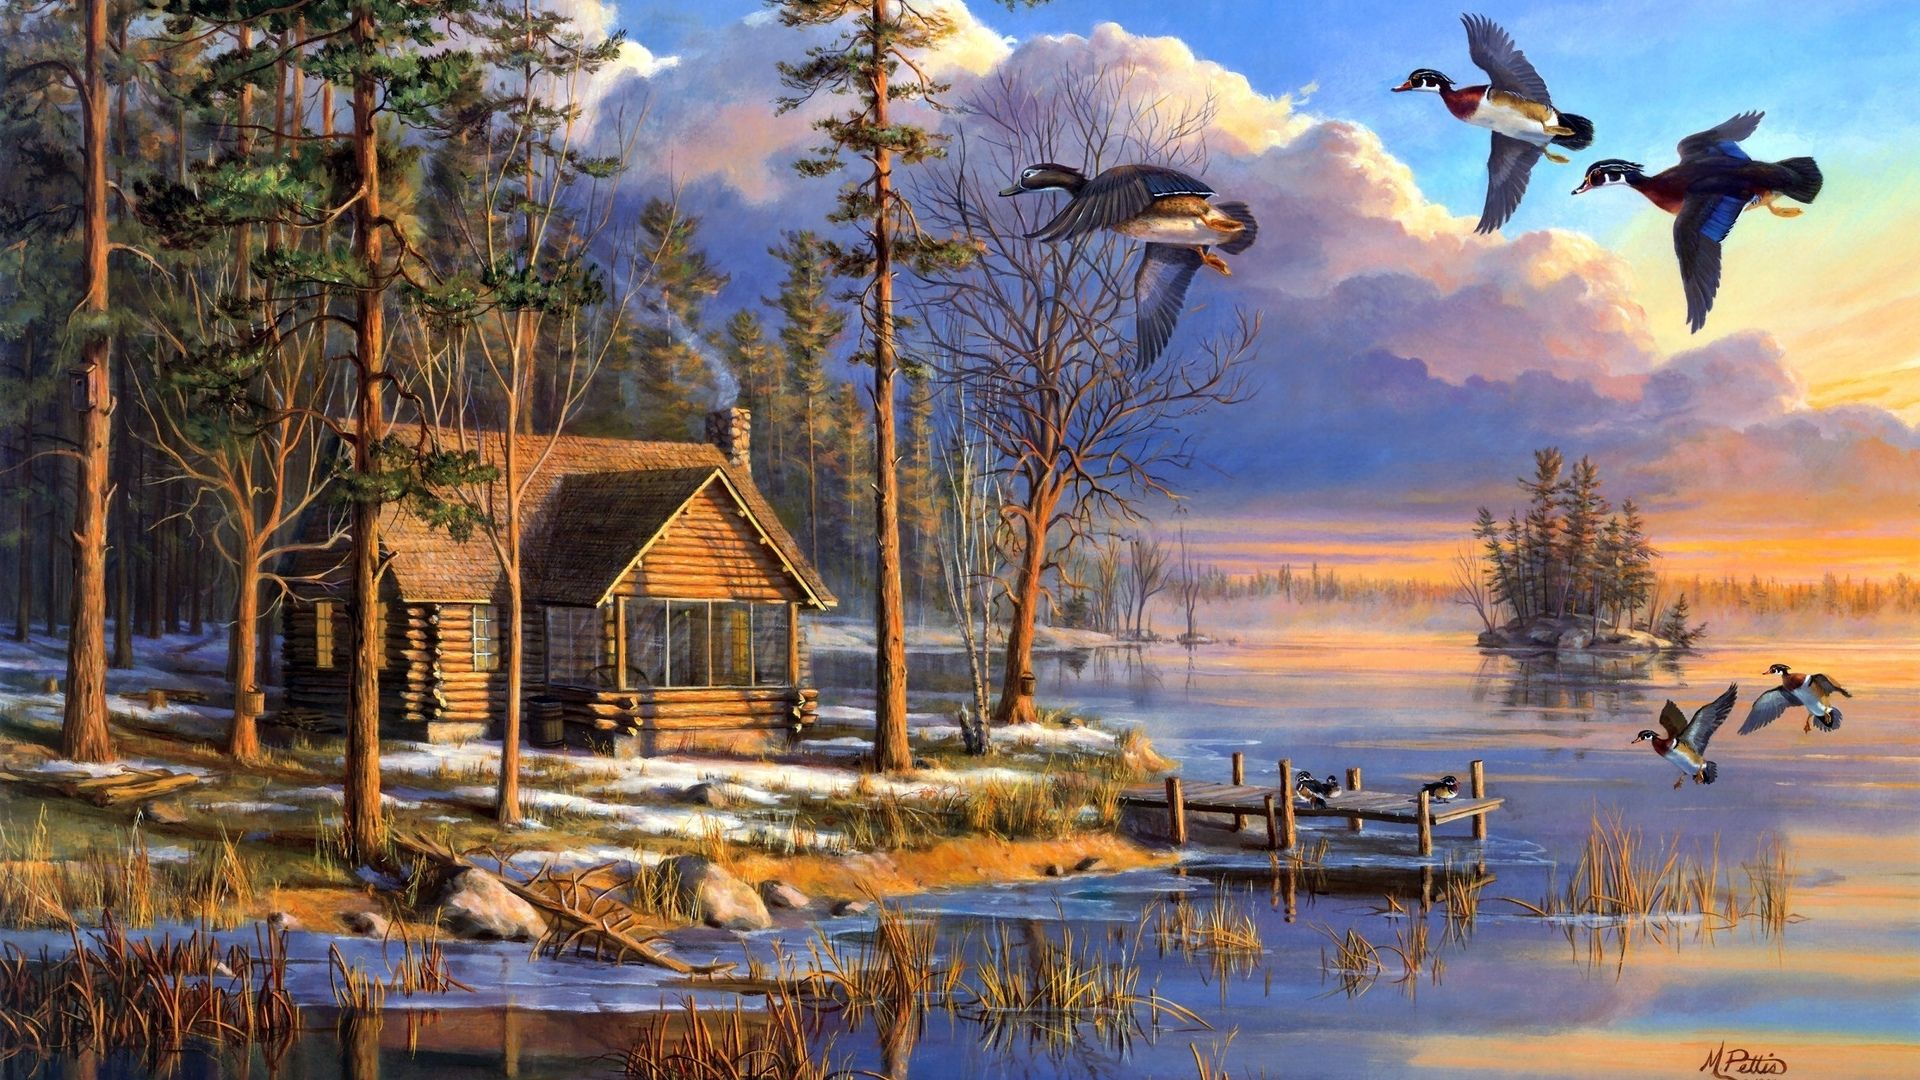 1920x1080 sunrise, mary pettis, Spring arrivals, flying, house, ducks, forest, painting, lake, spring